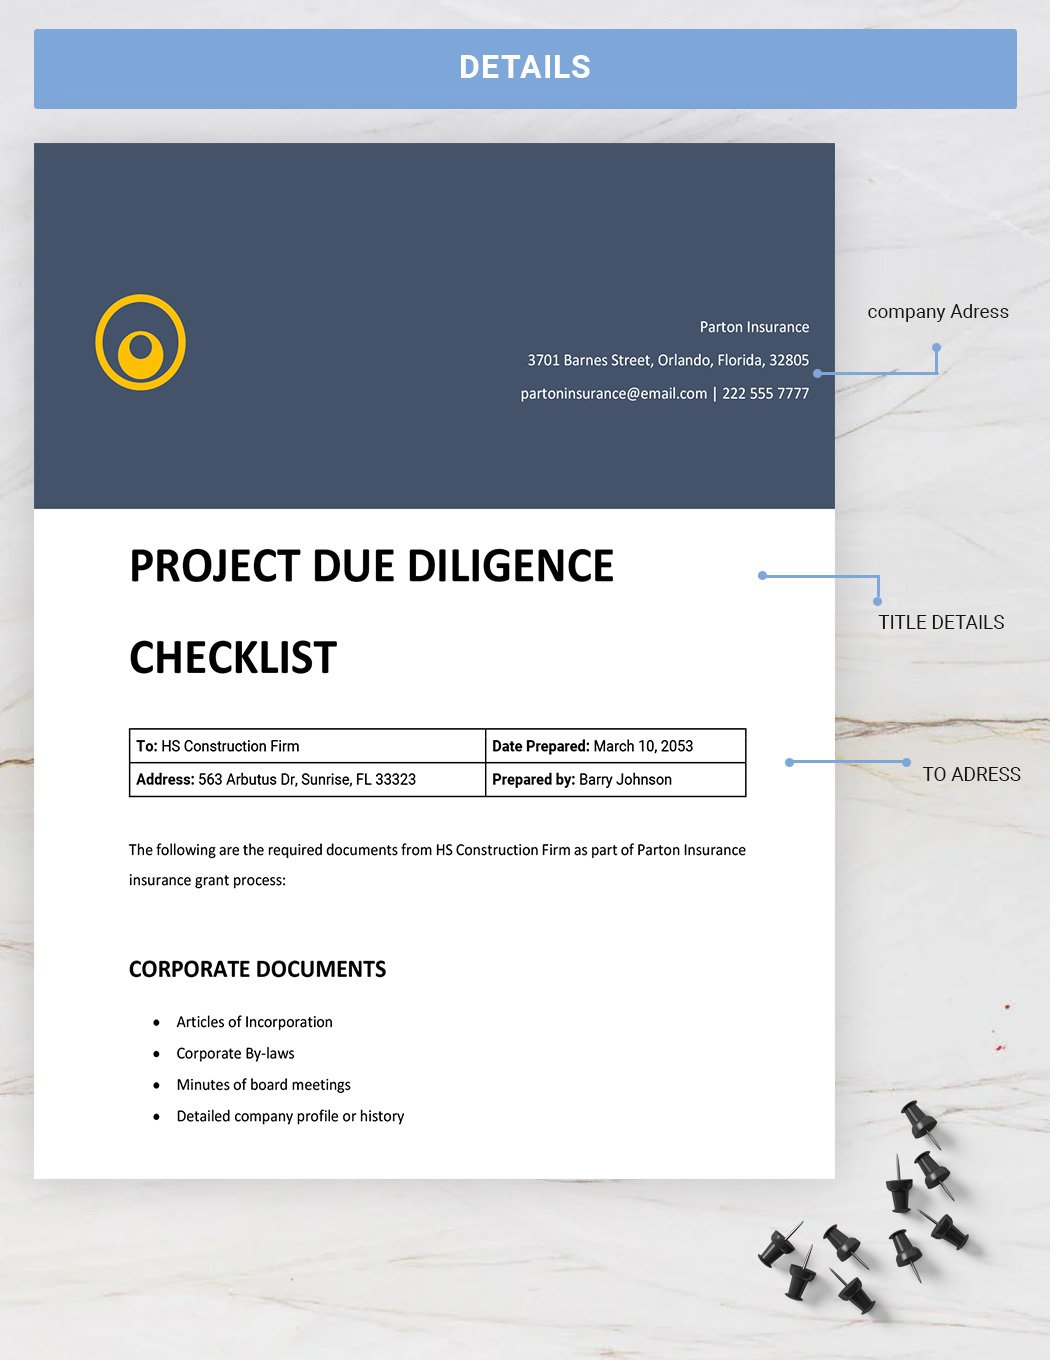 Project Due Diligence 